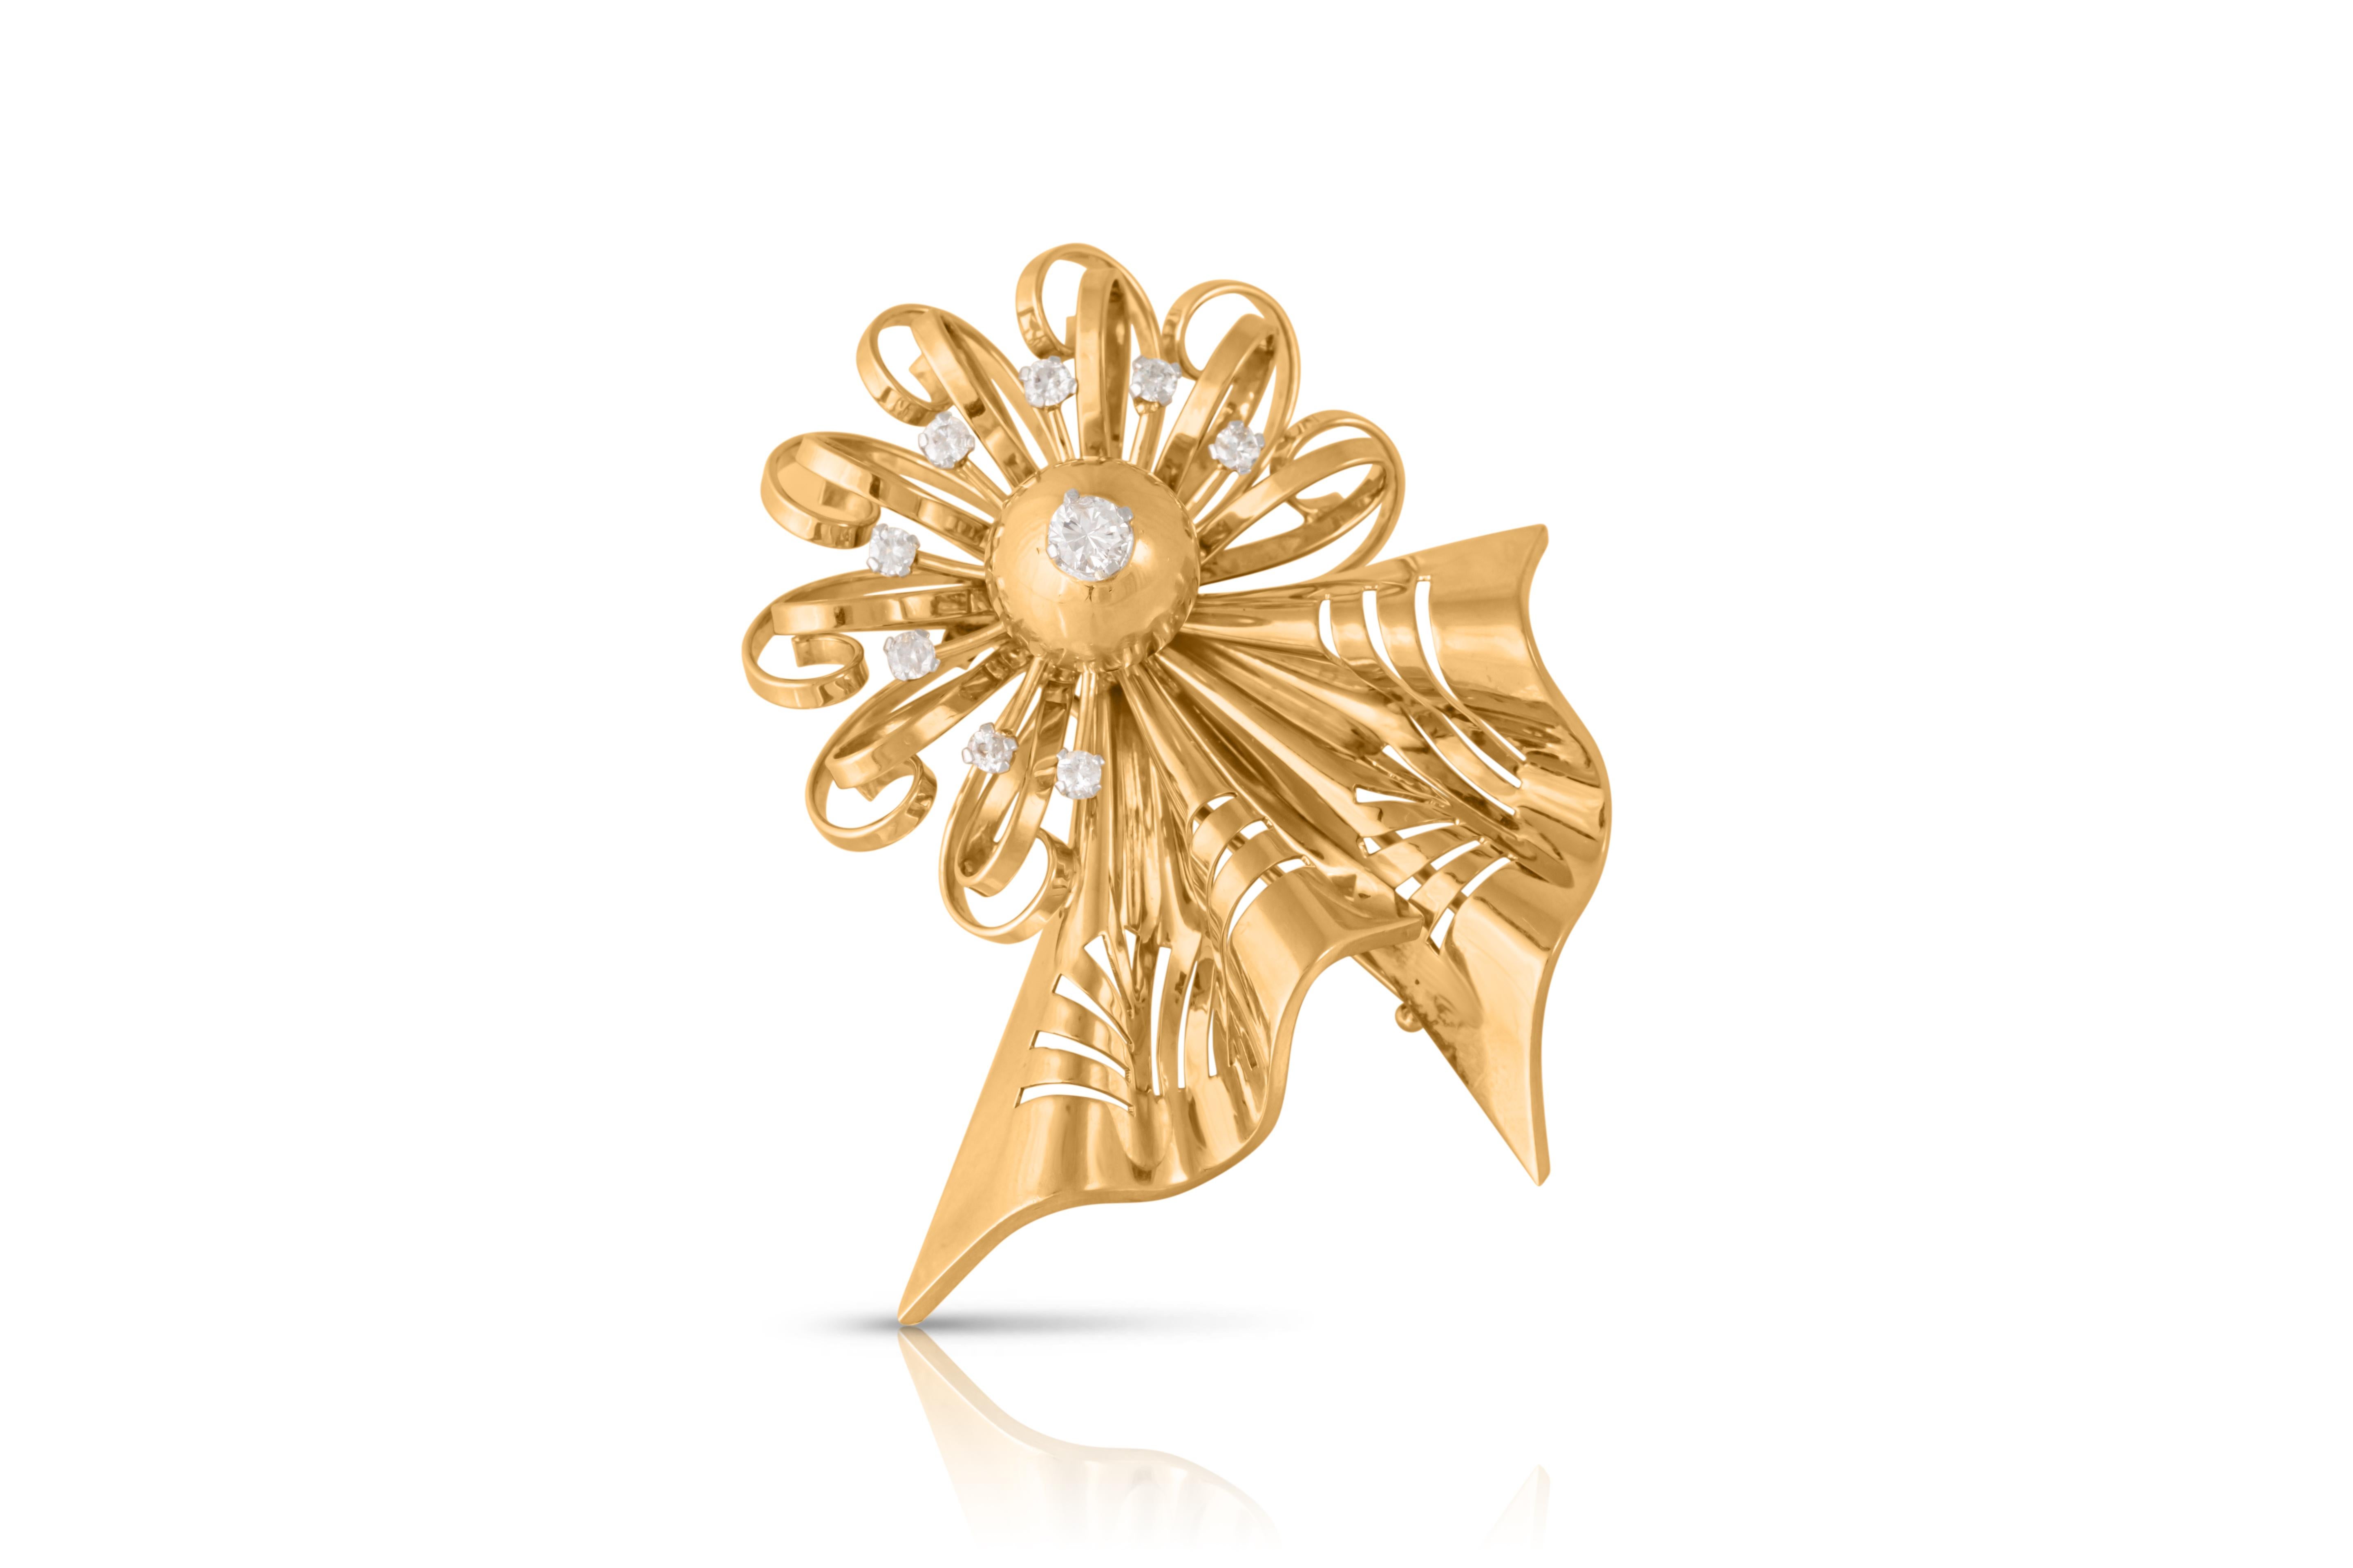 Giftwrap your lapel in this fun and festive gold brooch from the fabulous Retro period. Artfully stylised in radiant 18ct gold, the multi-dimensional design comprises eight looping bows tied in two undulating ribbons with hollow detailing. Sparkling